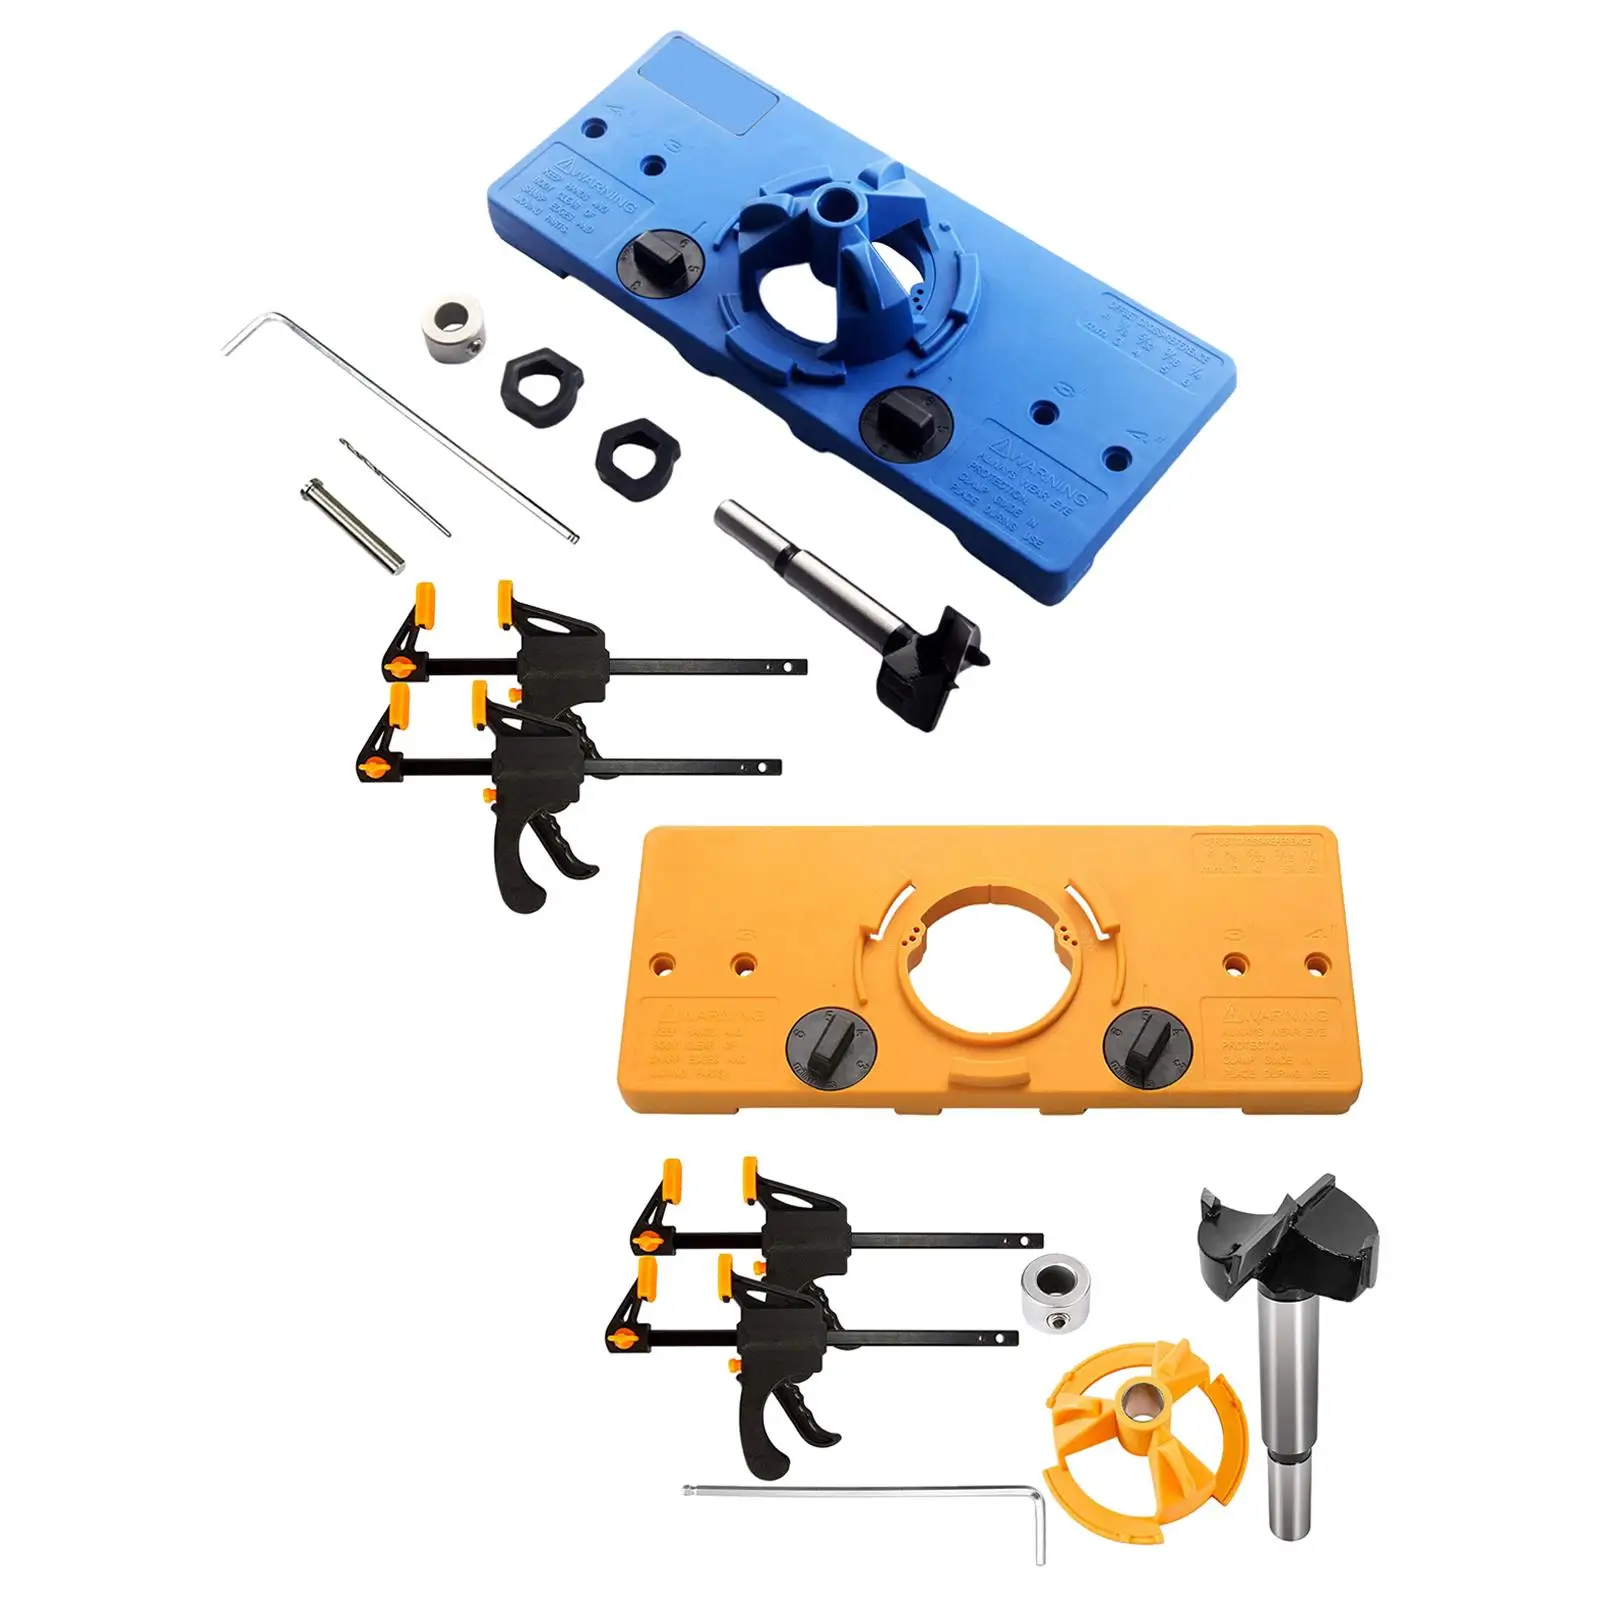 35mm Hinge Hole Drilling   Locator Open Hole Positioner for Cabinet Door